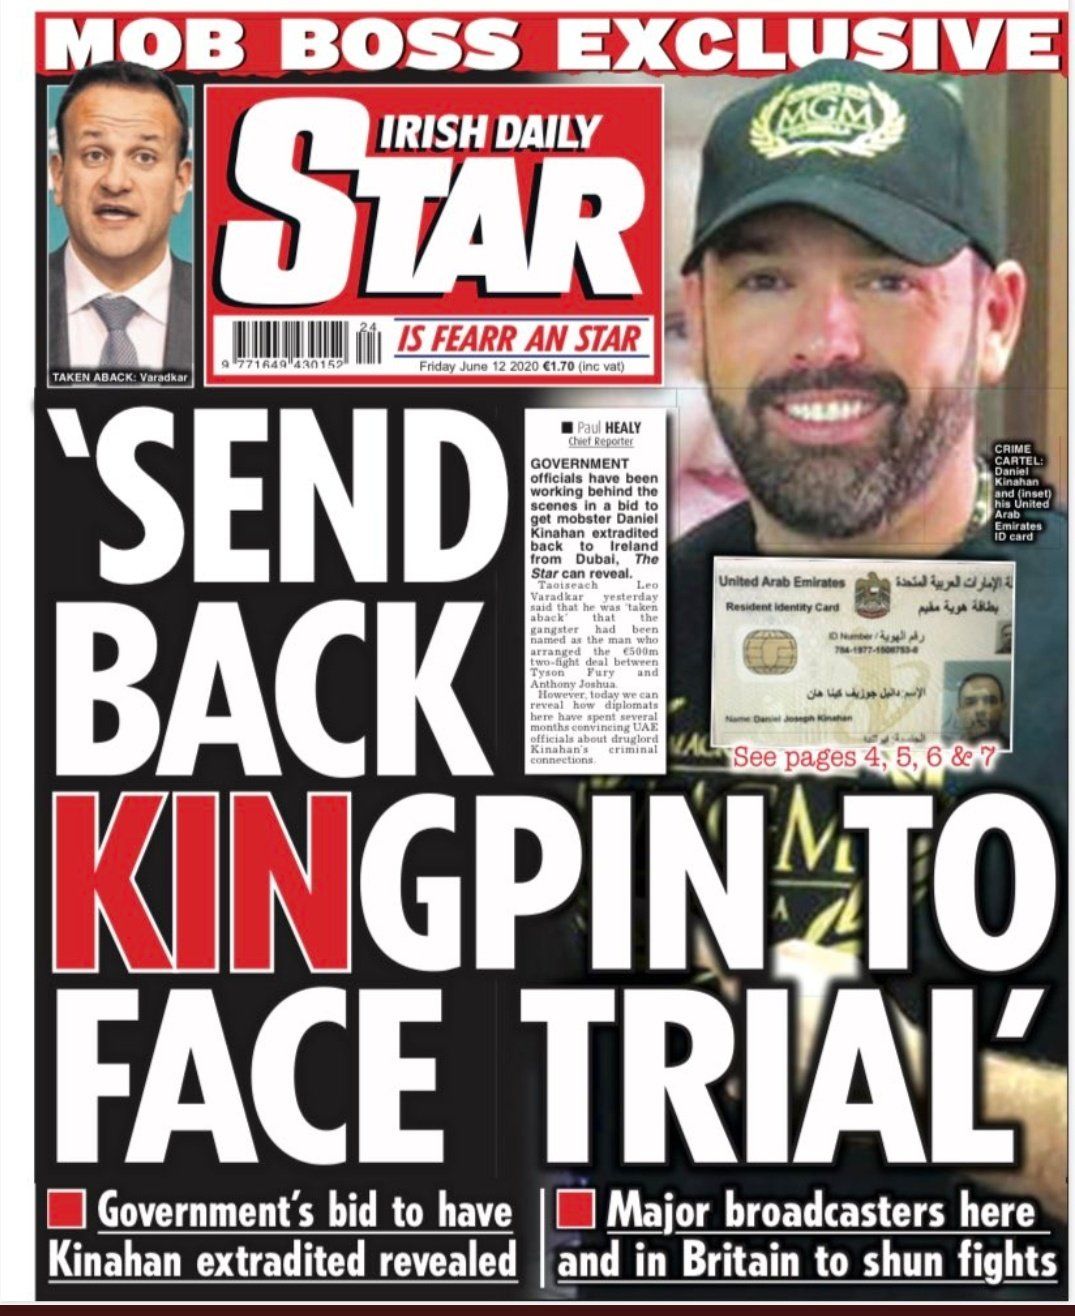 Cover of Irish Daily Star with Kinahan